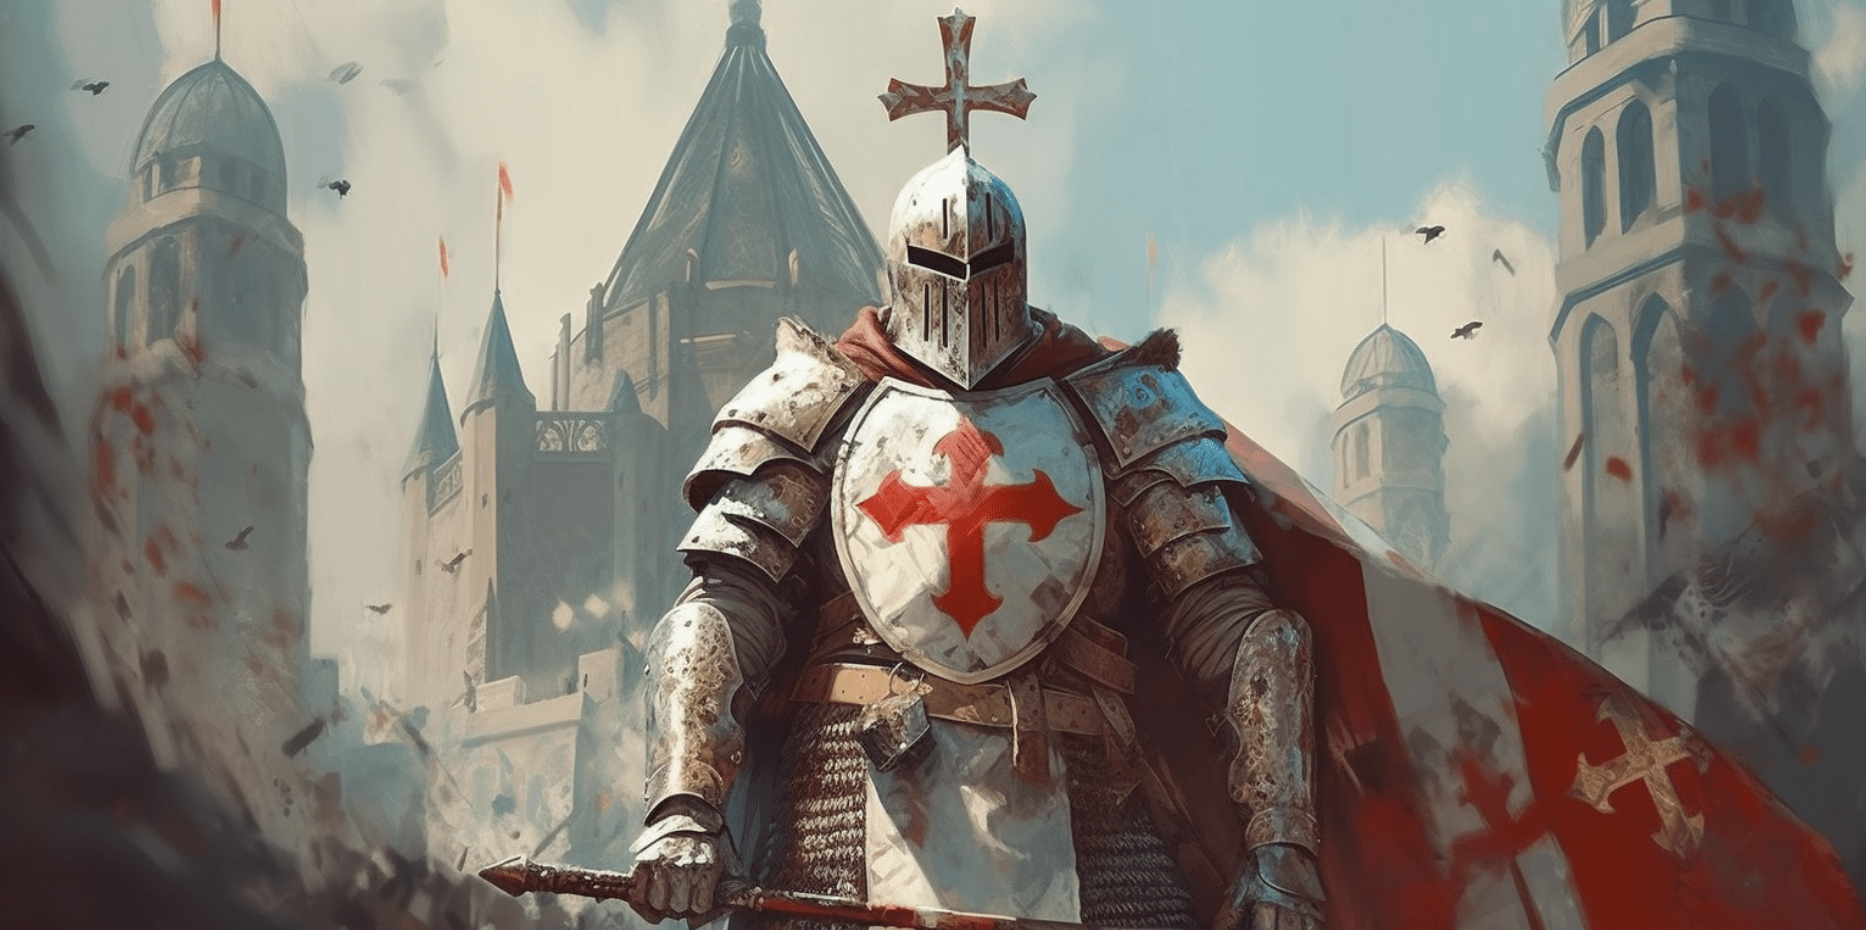 The Powerful Curse of Jacques de Molay, the Last Grand Master of